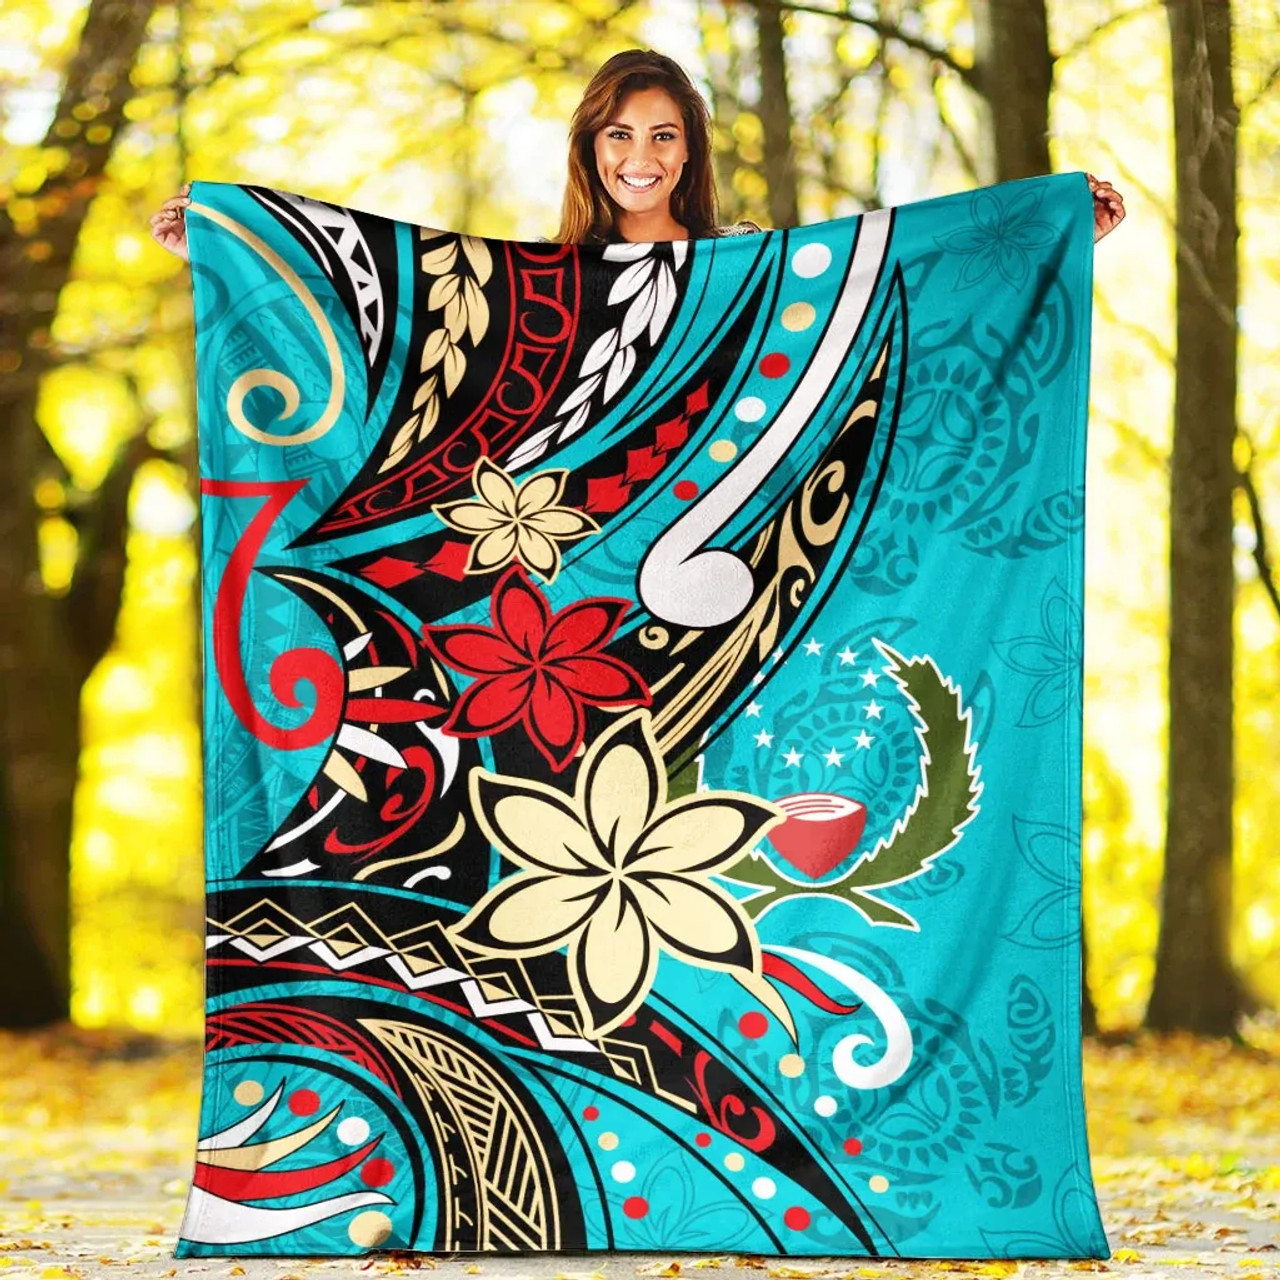 Pohnpei Premium Blanket - Tribal Flower With Special Turtles Blue Color 5